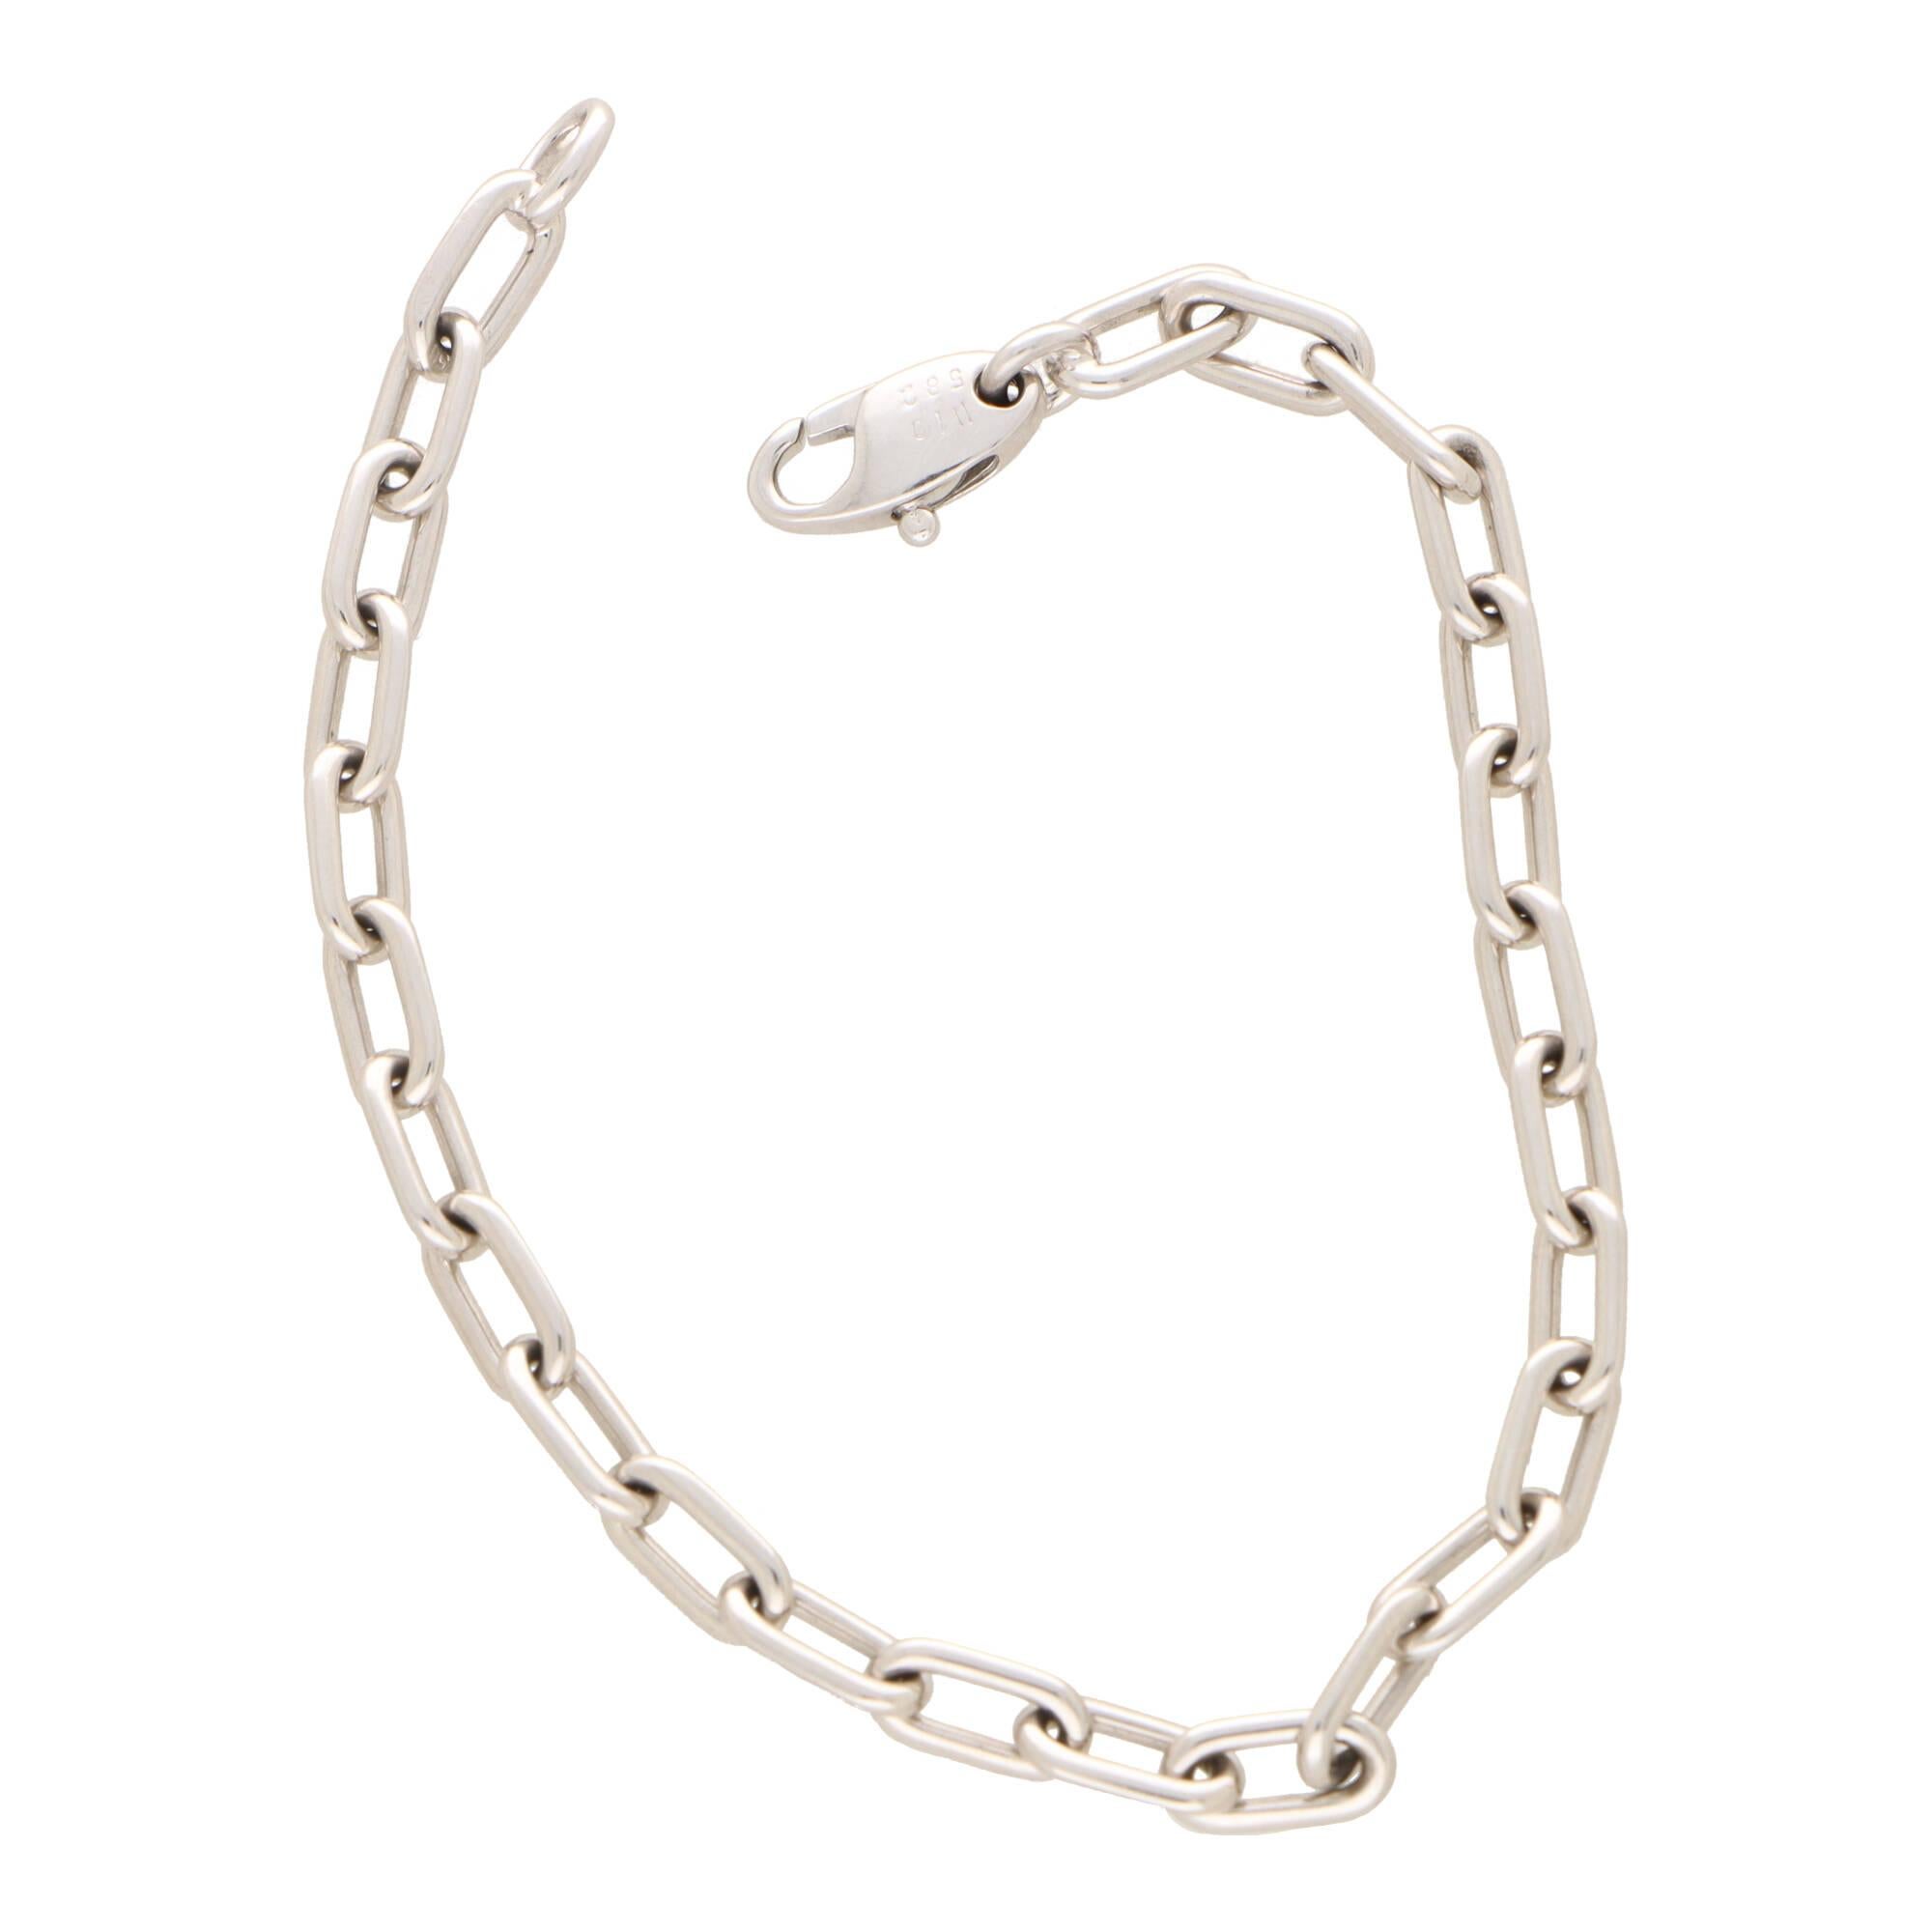 A beautiful vintage Cartier 'Spartacus' open link chain bracelet set in 18k white gold.

The bracelet is composed of 27 solid rose gold links and fastened with a lobster clasp fitting. The clasp is stamped with the Cartier logo motif which is a